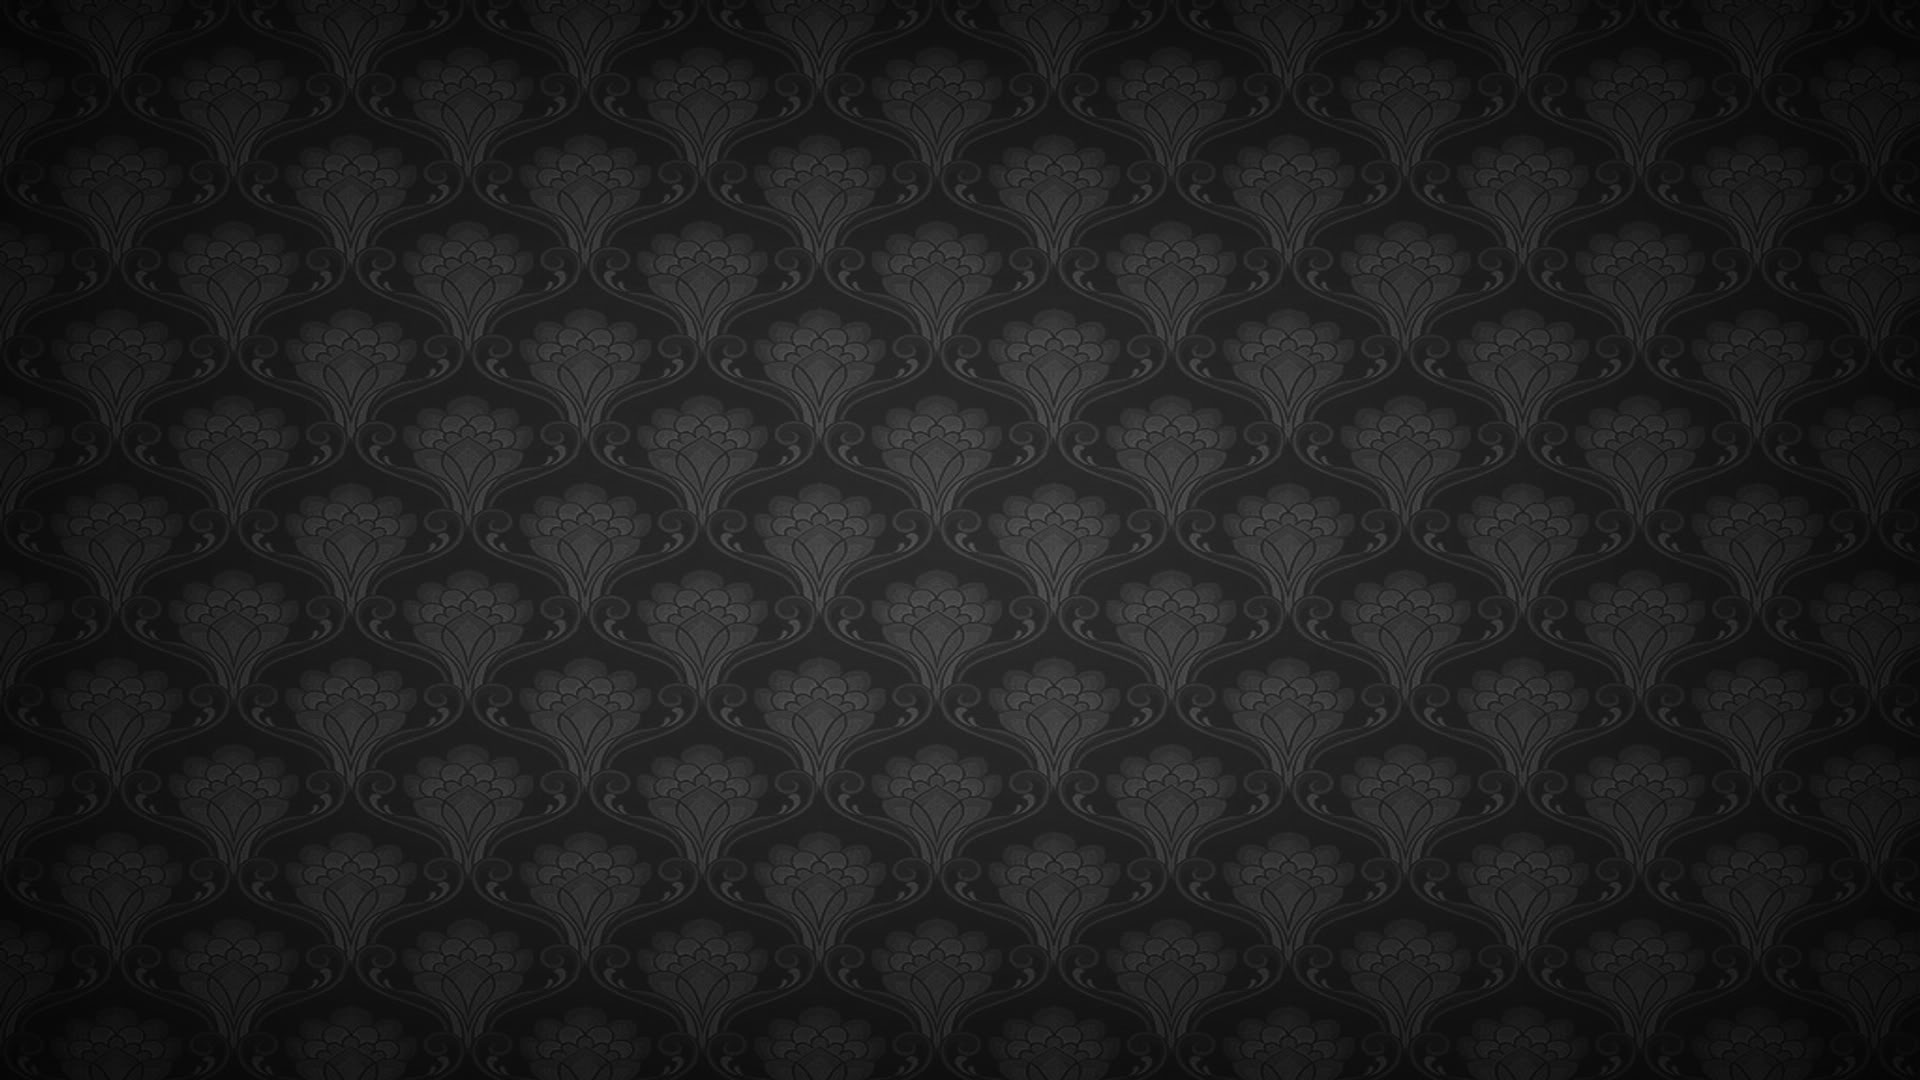 Black Website Background Wallpaper   MixHD wallpapers